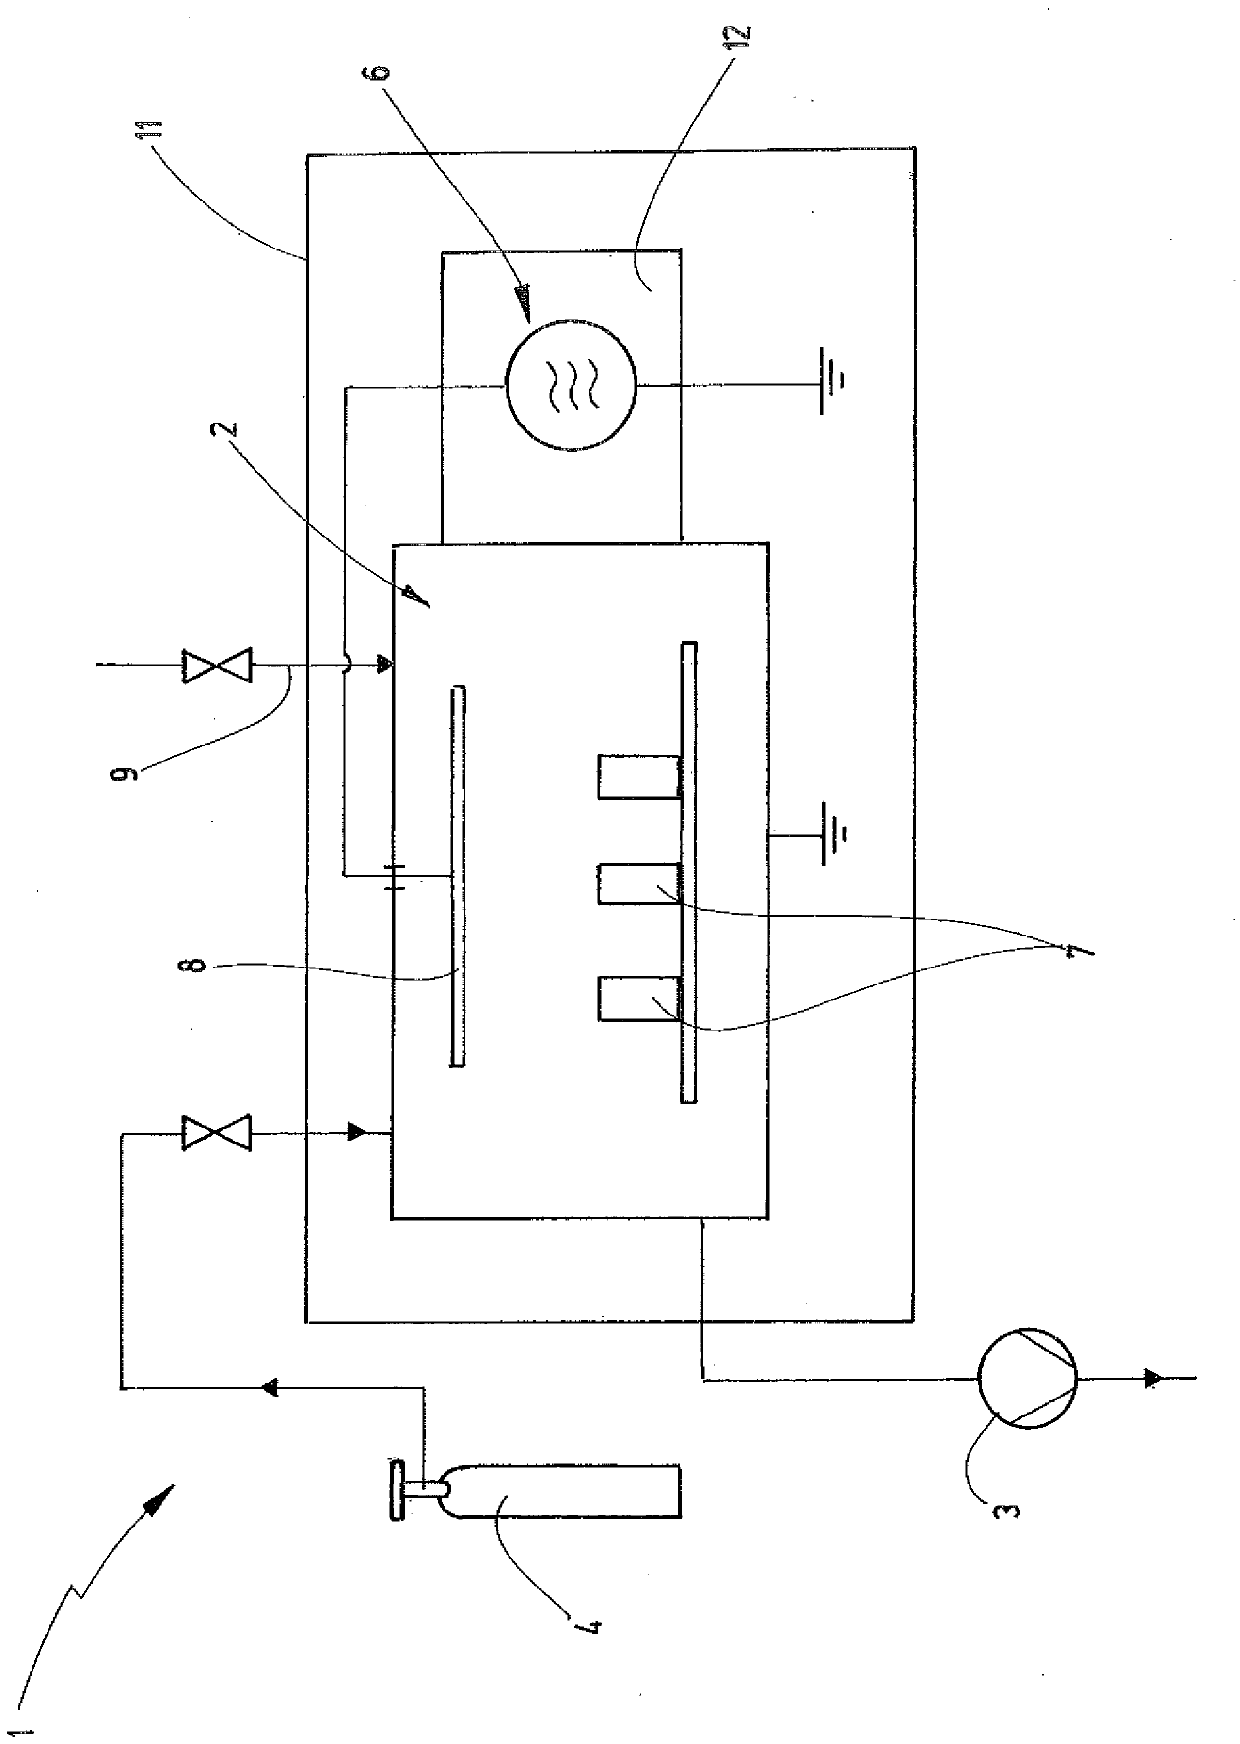 Circuit assembly for providing high-frequency energy, and system for generating an electric discharge